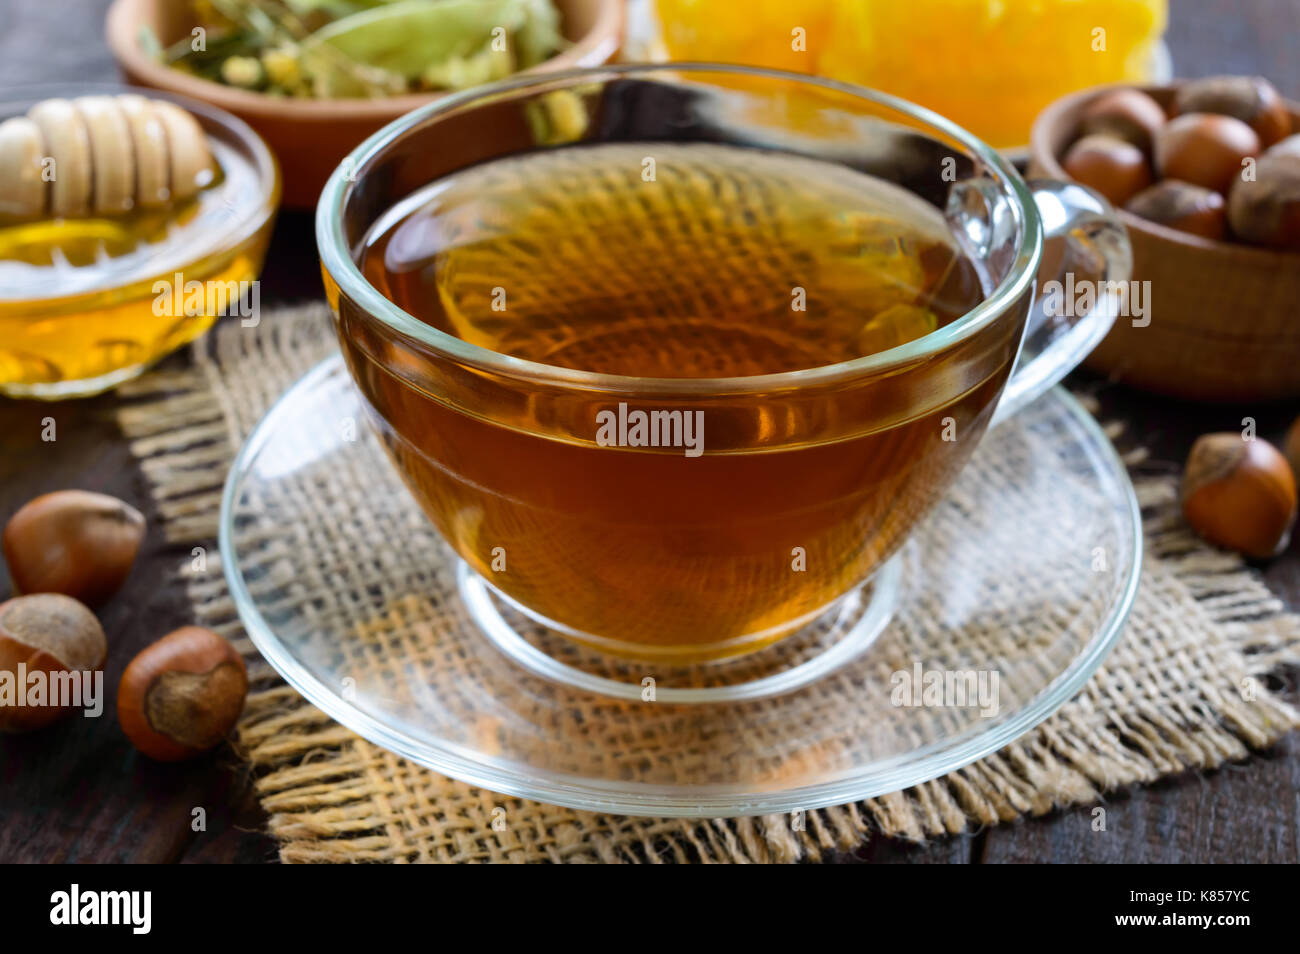 A cup of fresh fragrant herbal tea with honey and hazelnuts on a dark wooden background. Close-up. Stock Photo